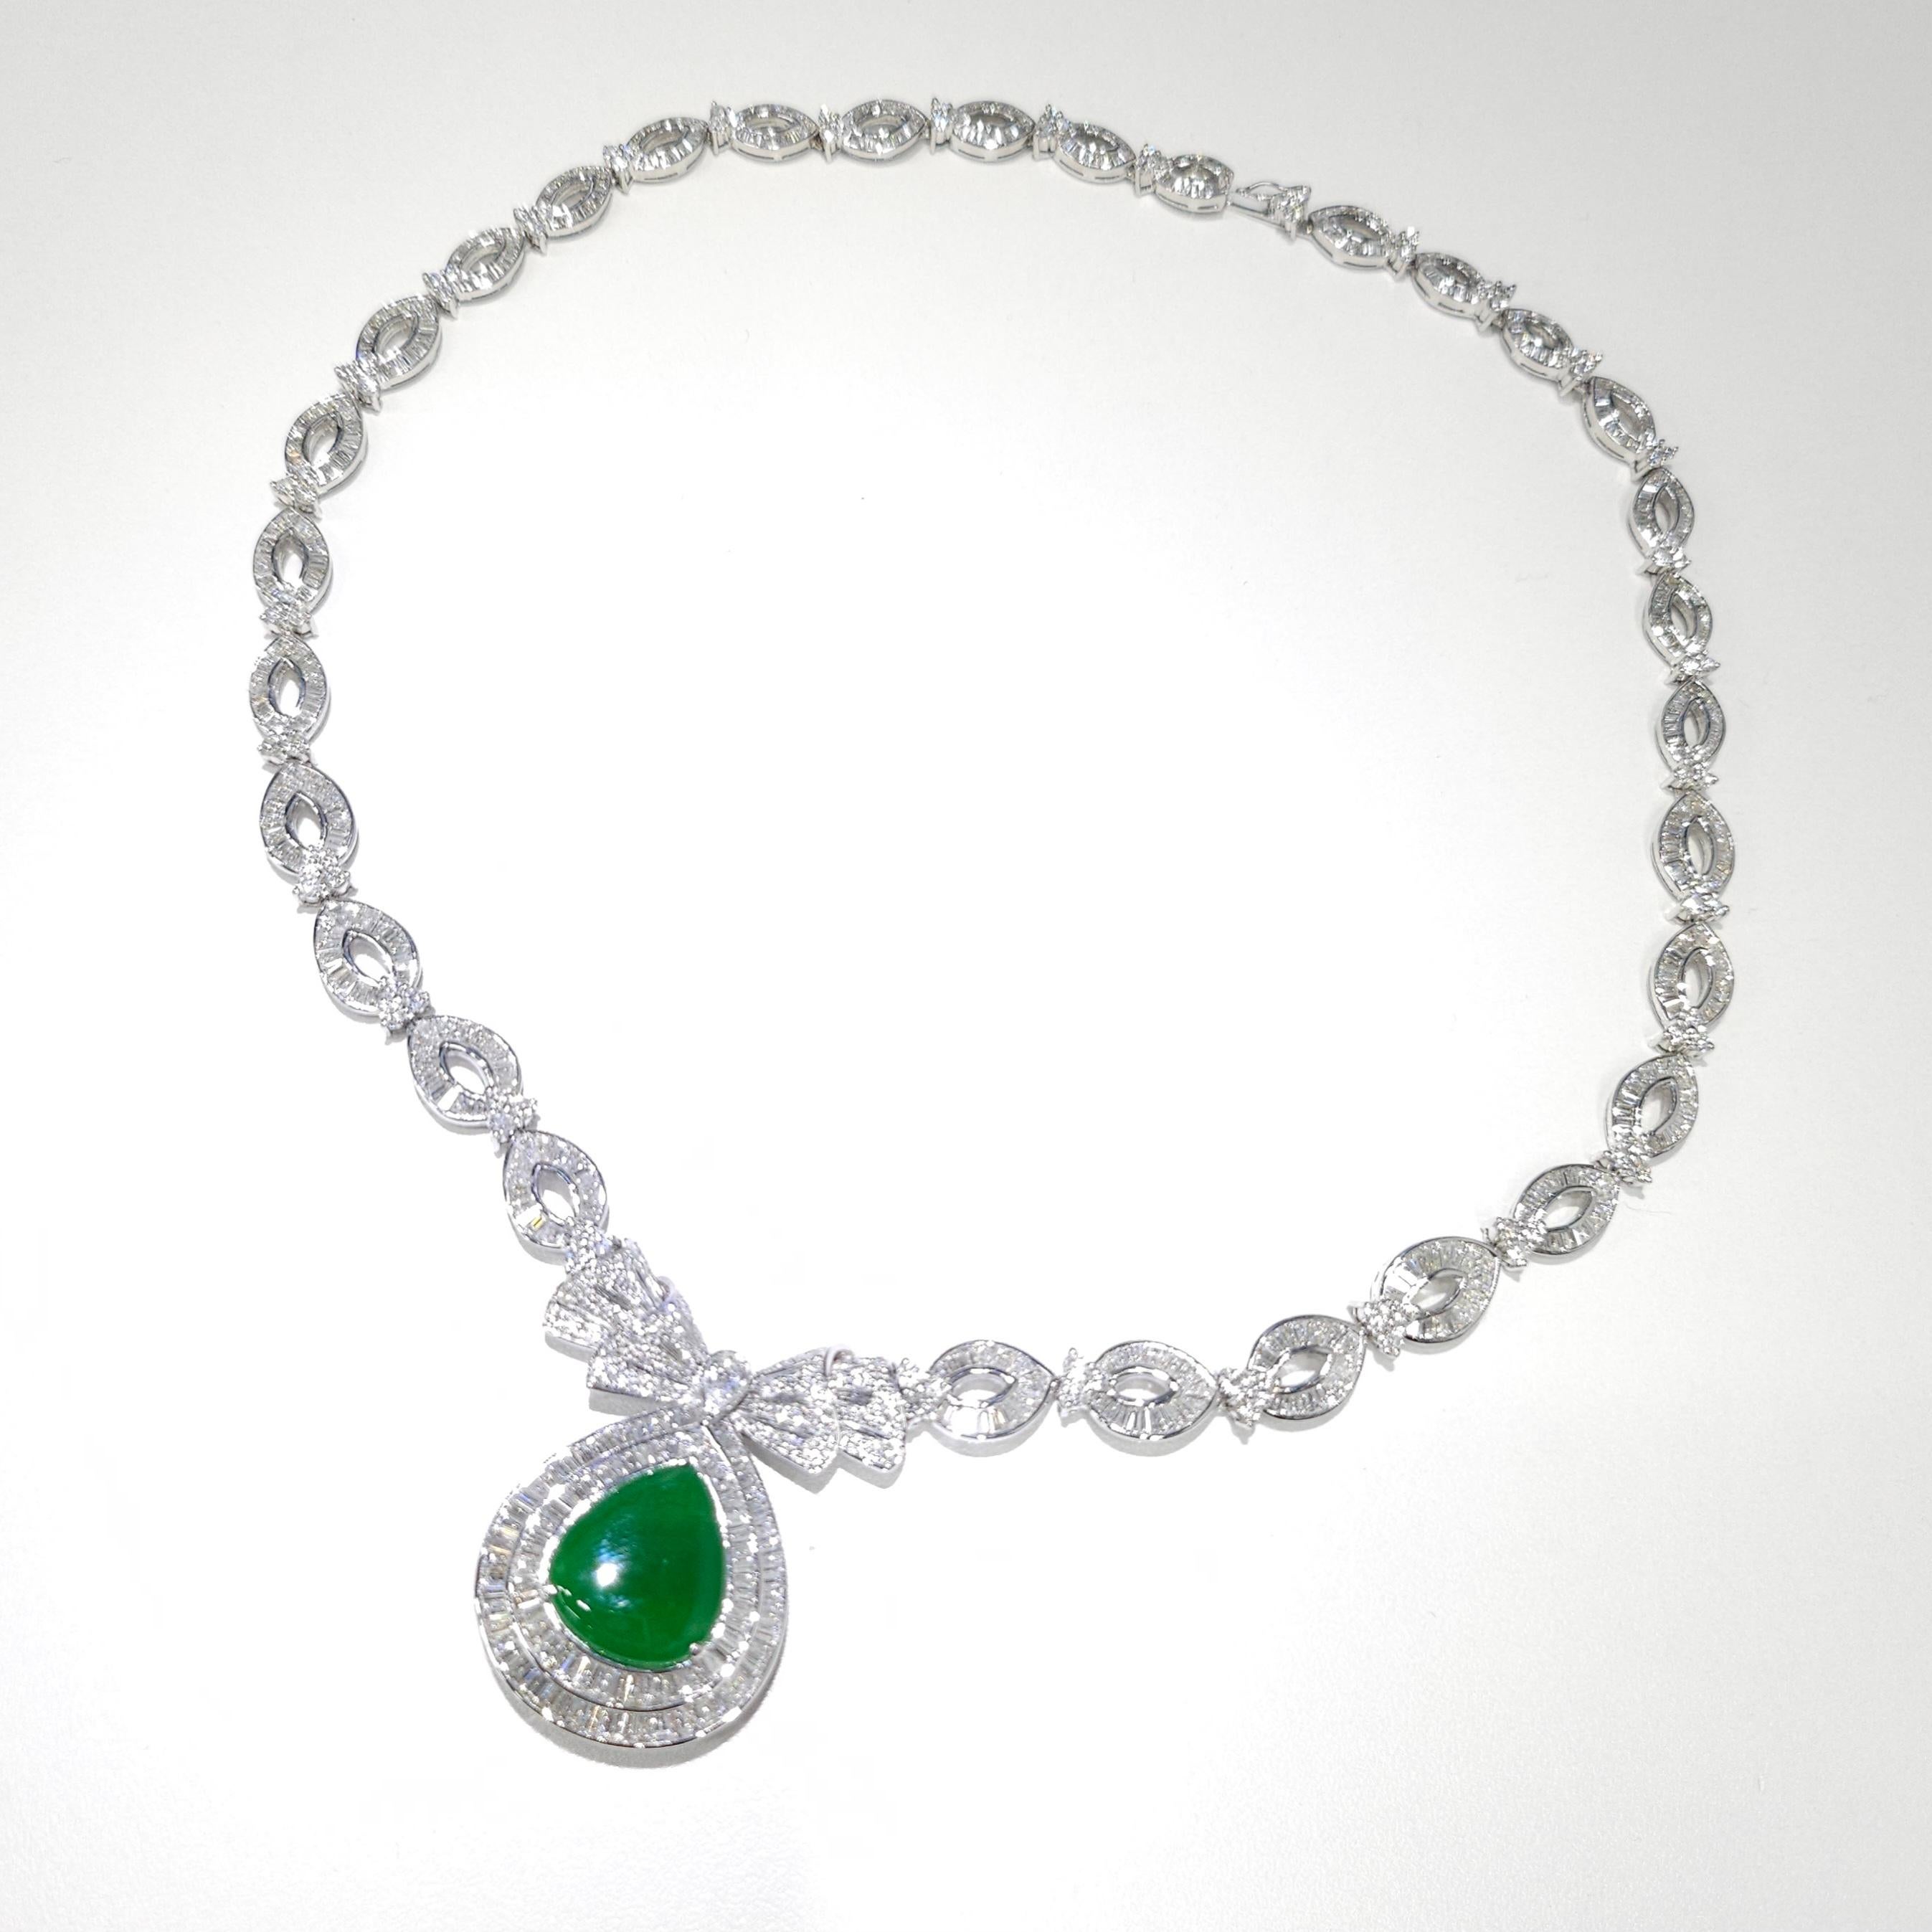 Certified Untreated Jadite Jade and 18Ct Diamond Necklace Brooch 18K White Gold For Sale 2